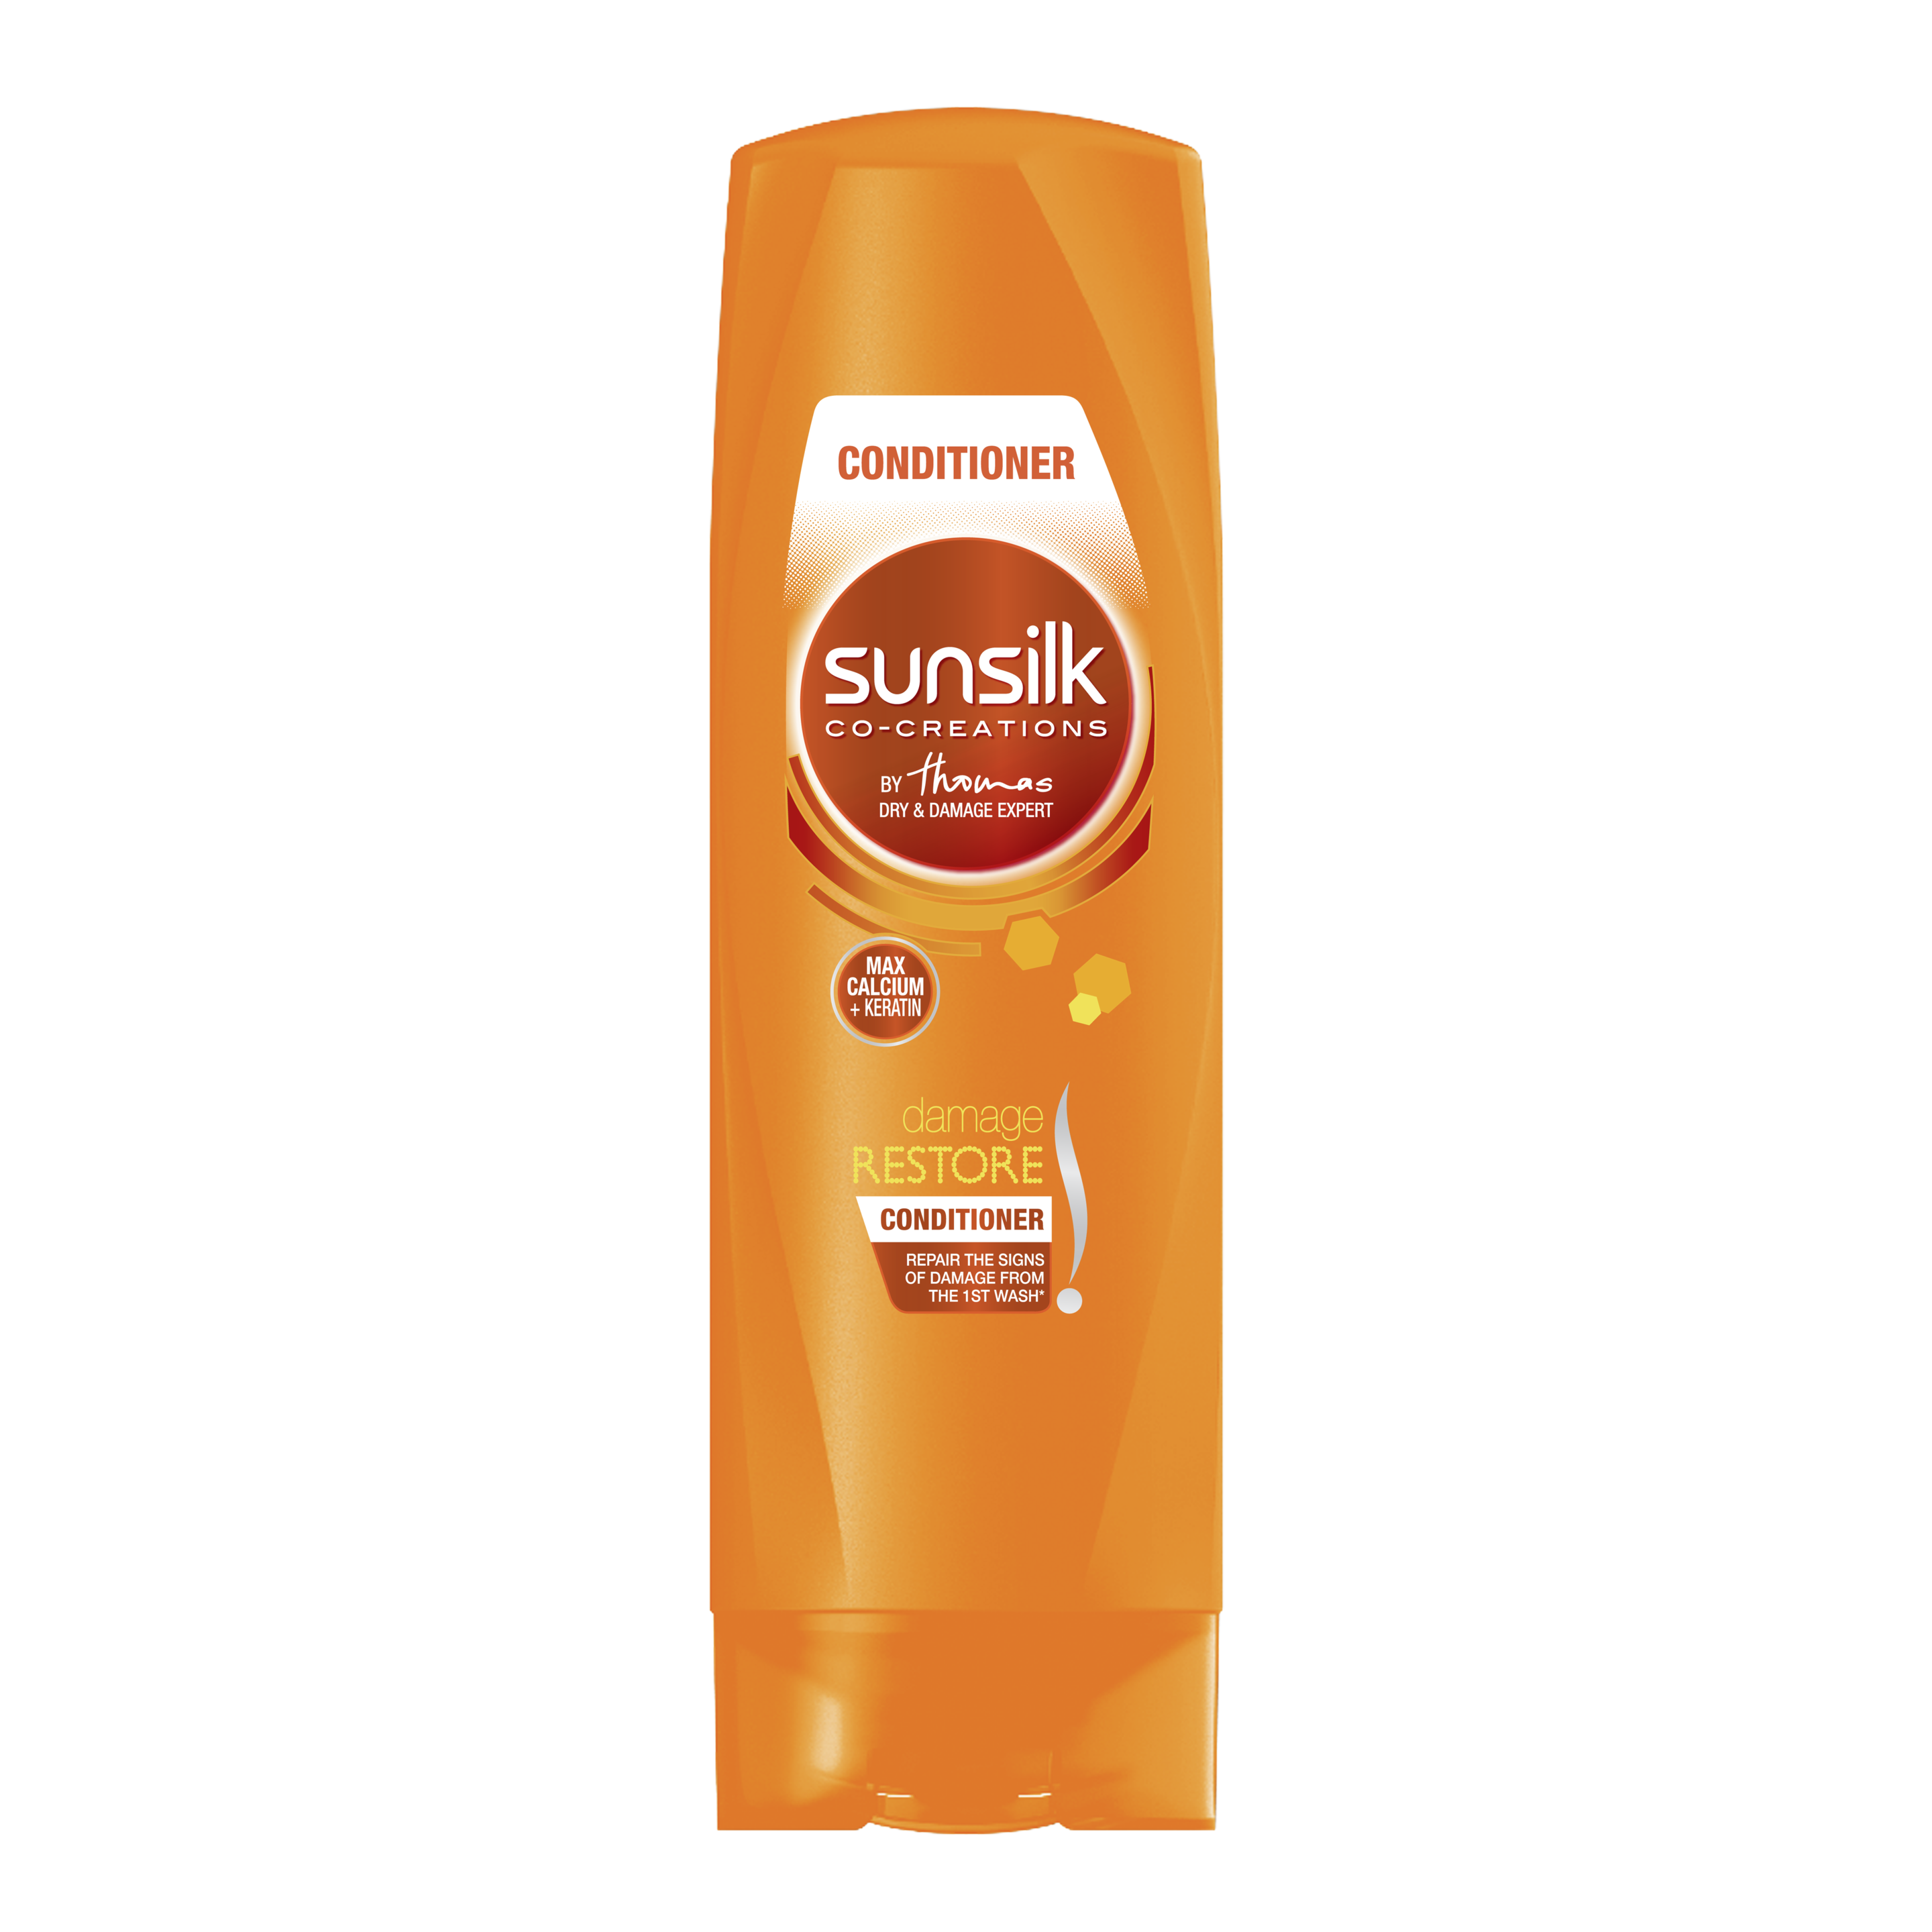 Sunsilk Damage Restore Conditioner 160ml front of pack image